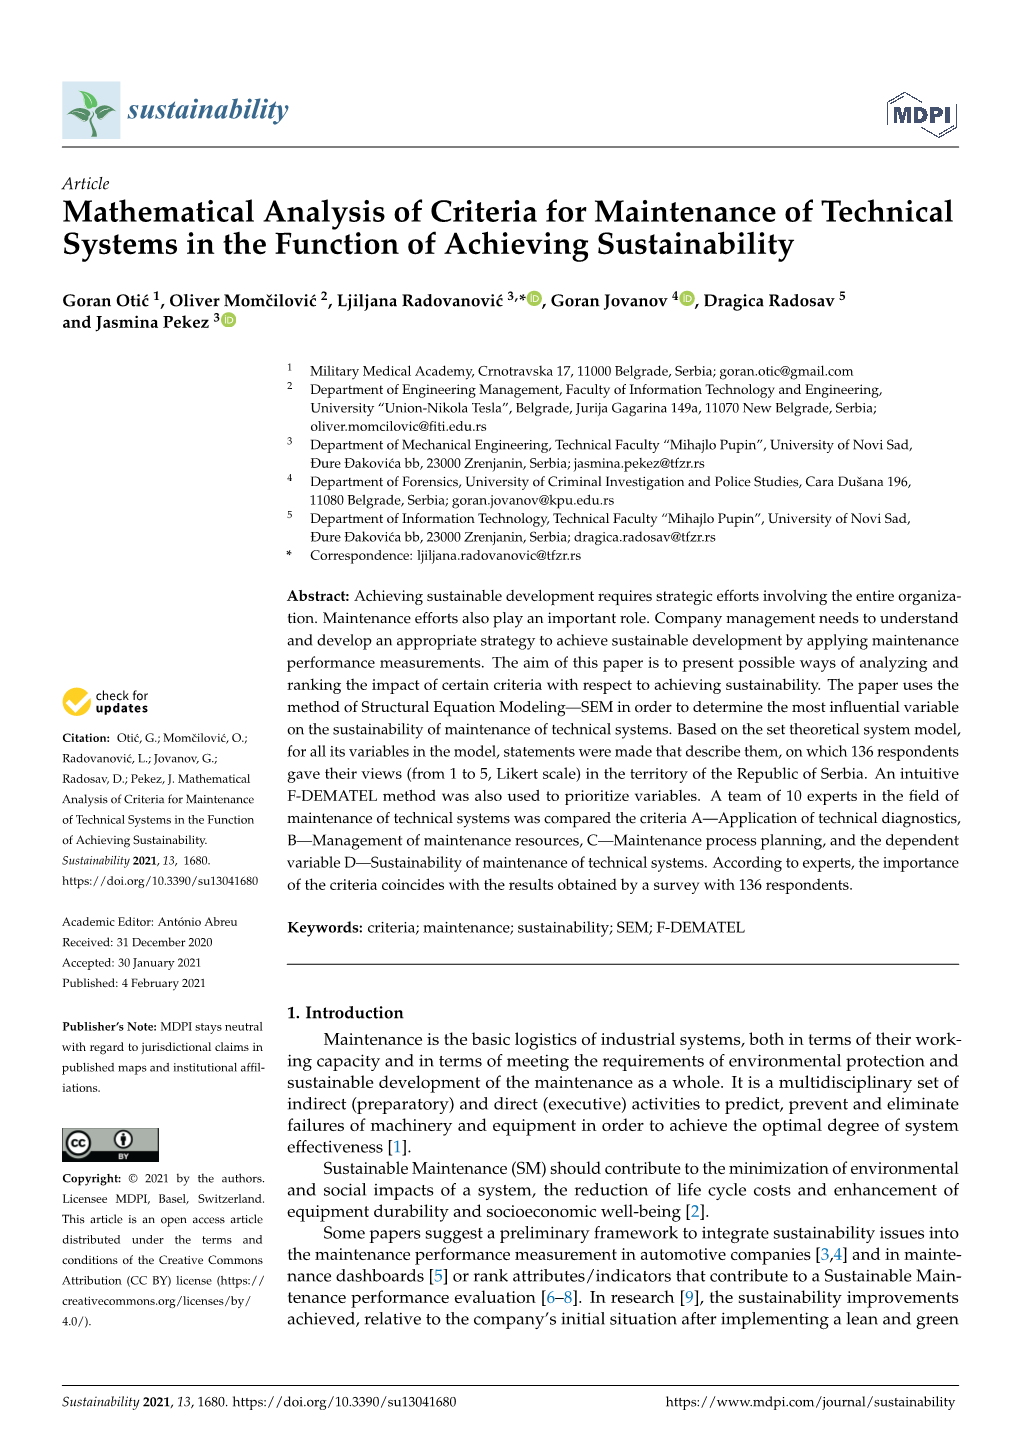 Mathematical Analysis of Criteria for Maintenance of Technical Systems in the Function of Achieving Sustainability